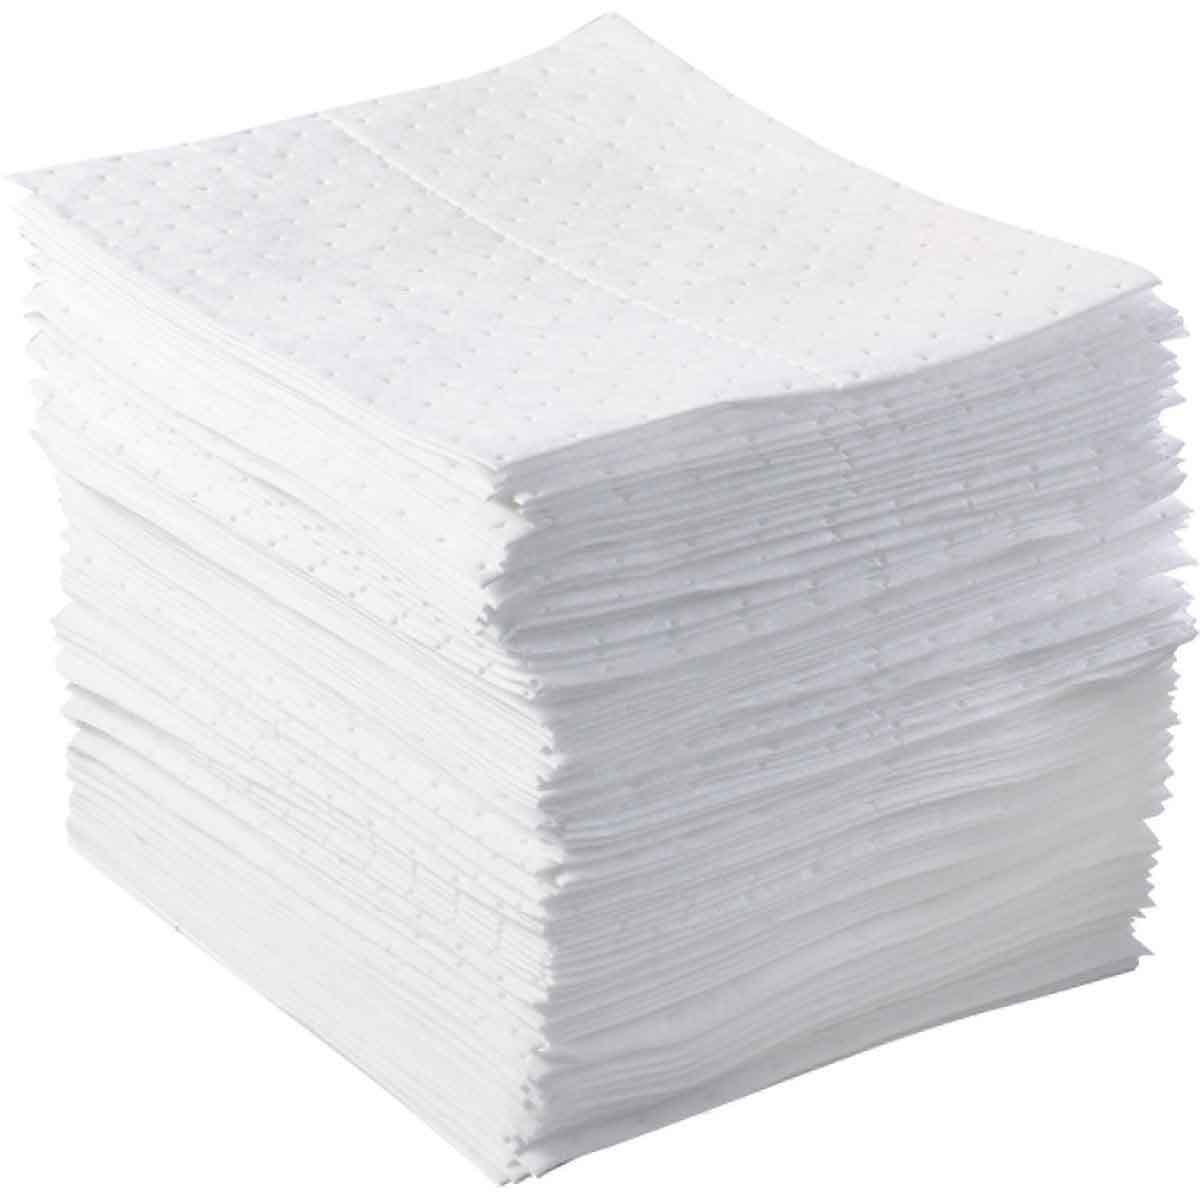 Washable Absorbent Fabric Material Type 2783 - Technical Absorbents